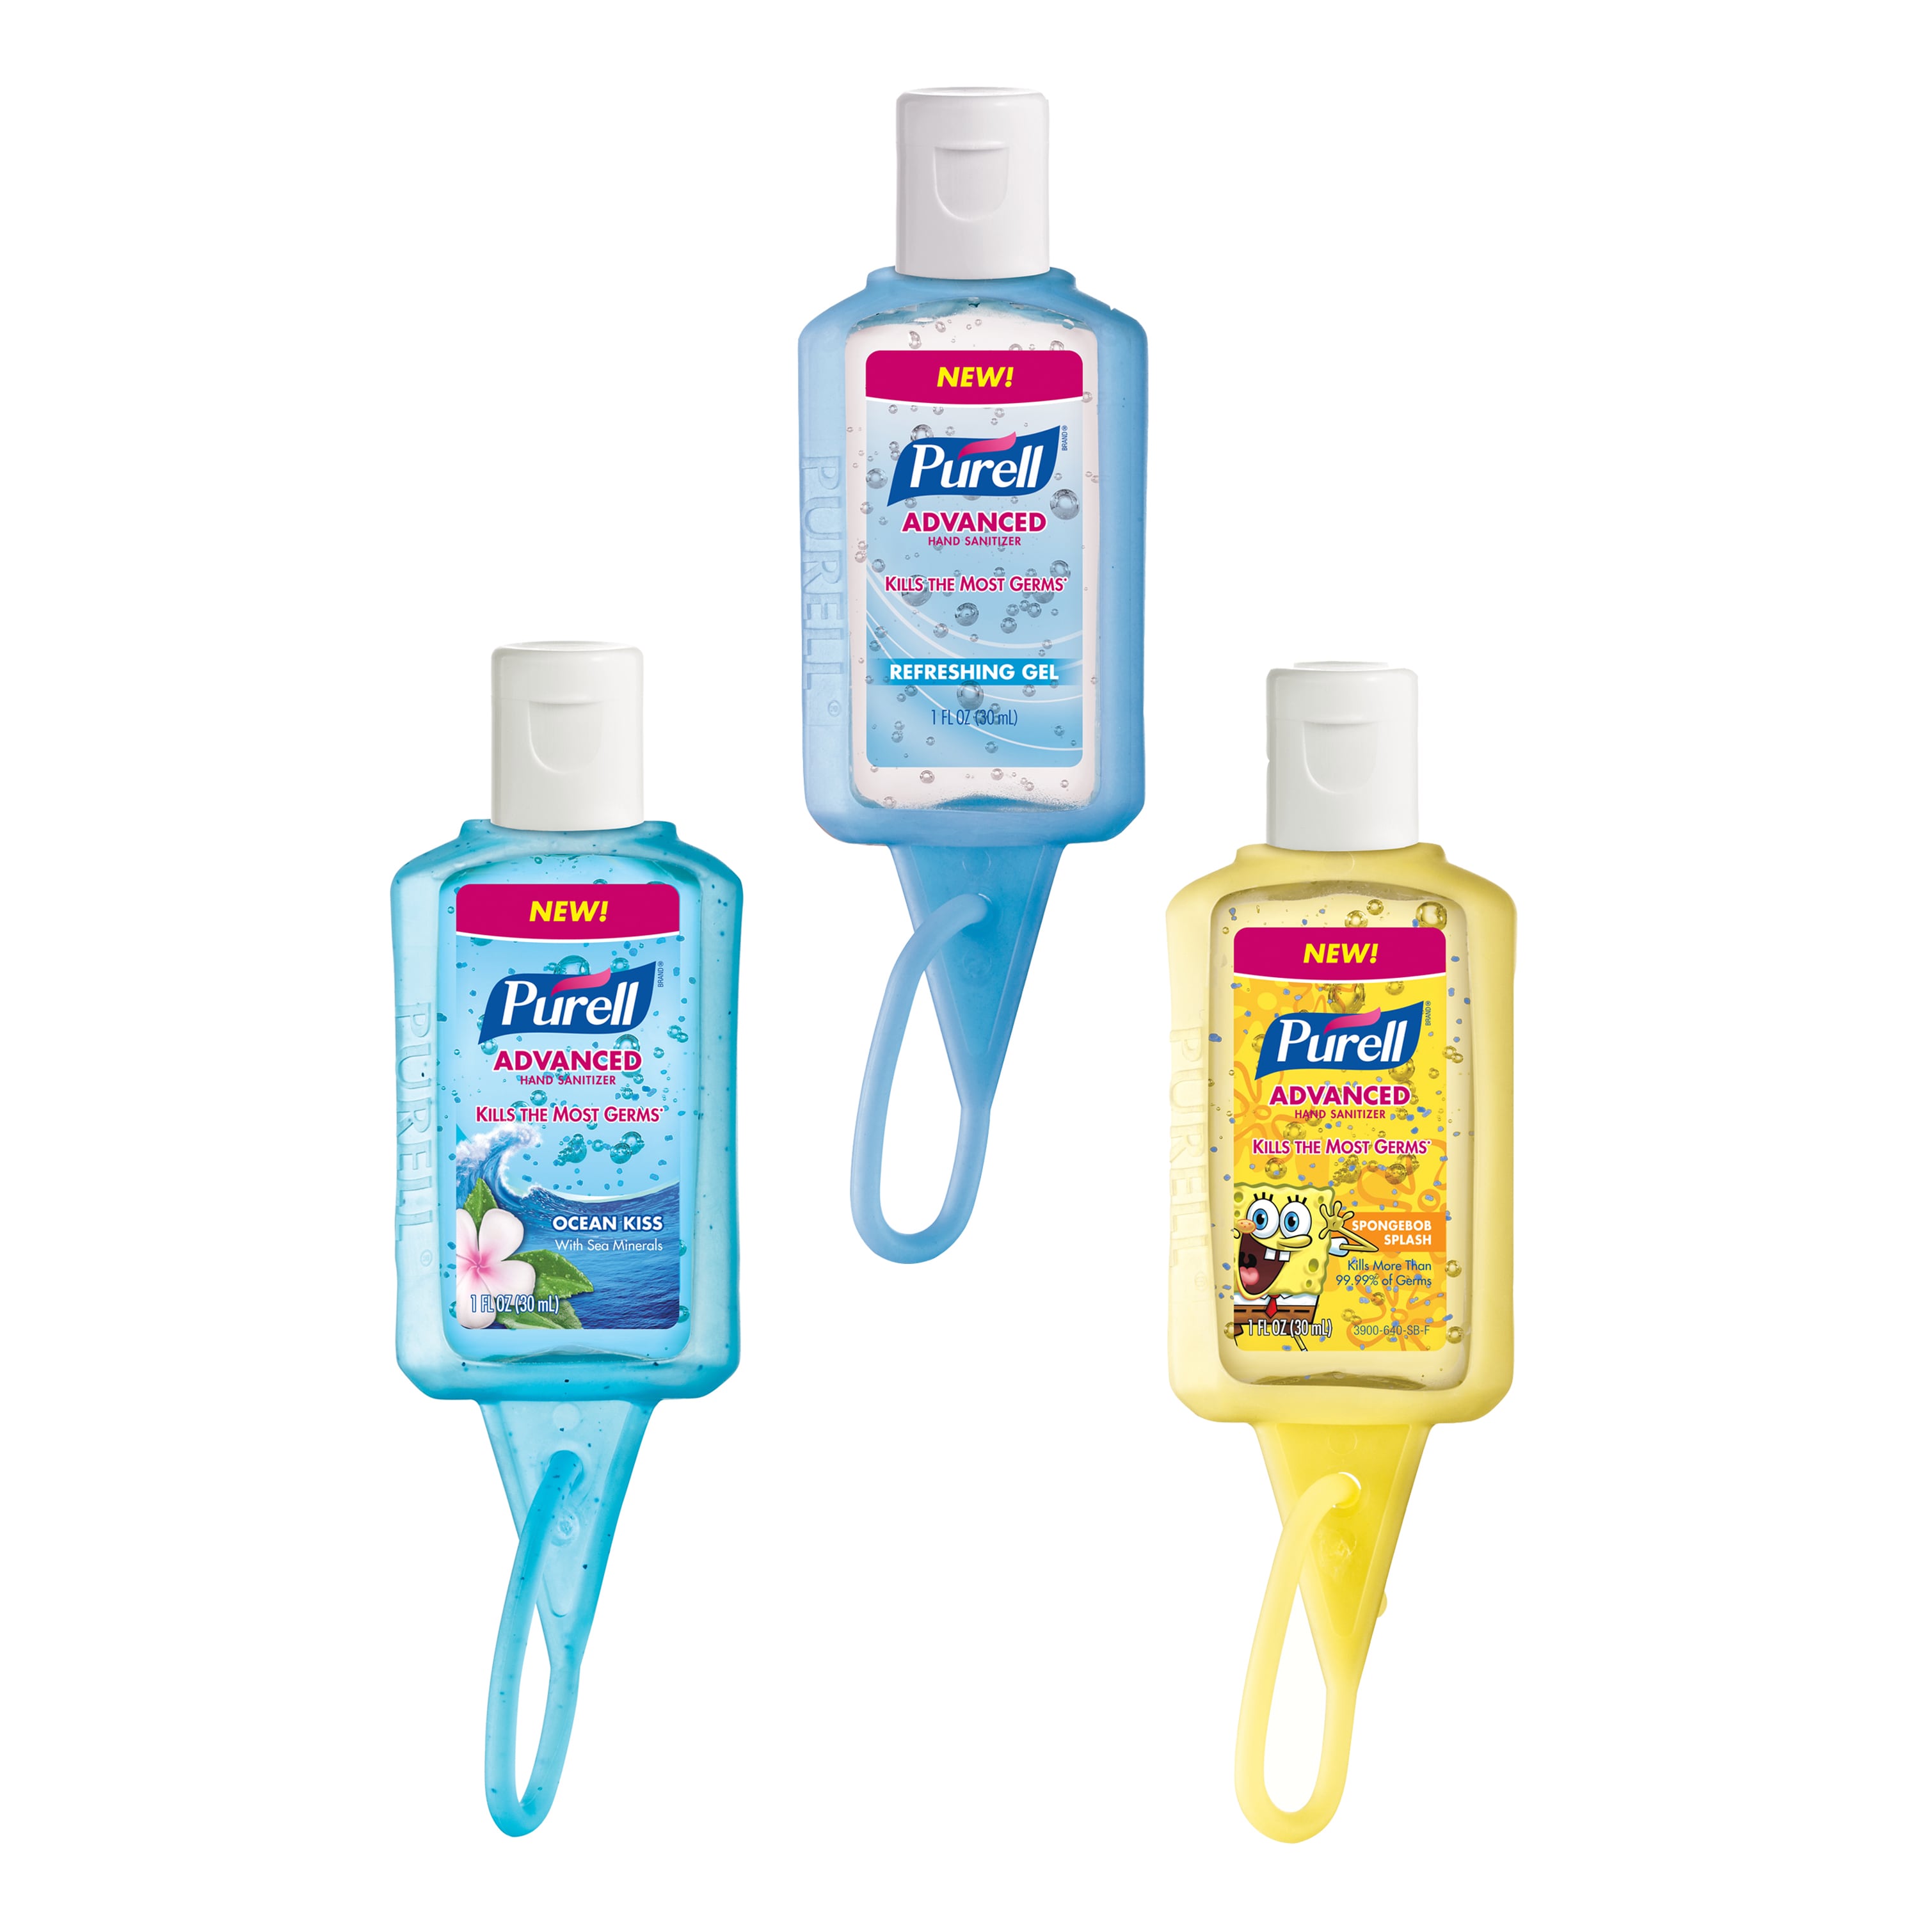 PURELL Advanced, 1 oz (Pack of 36) - image 2 of 2